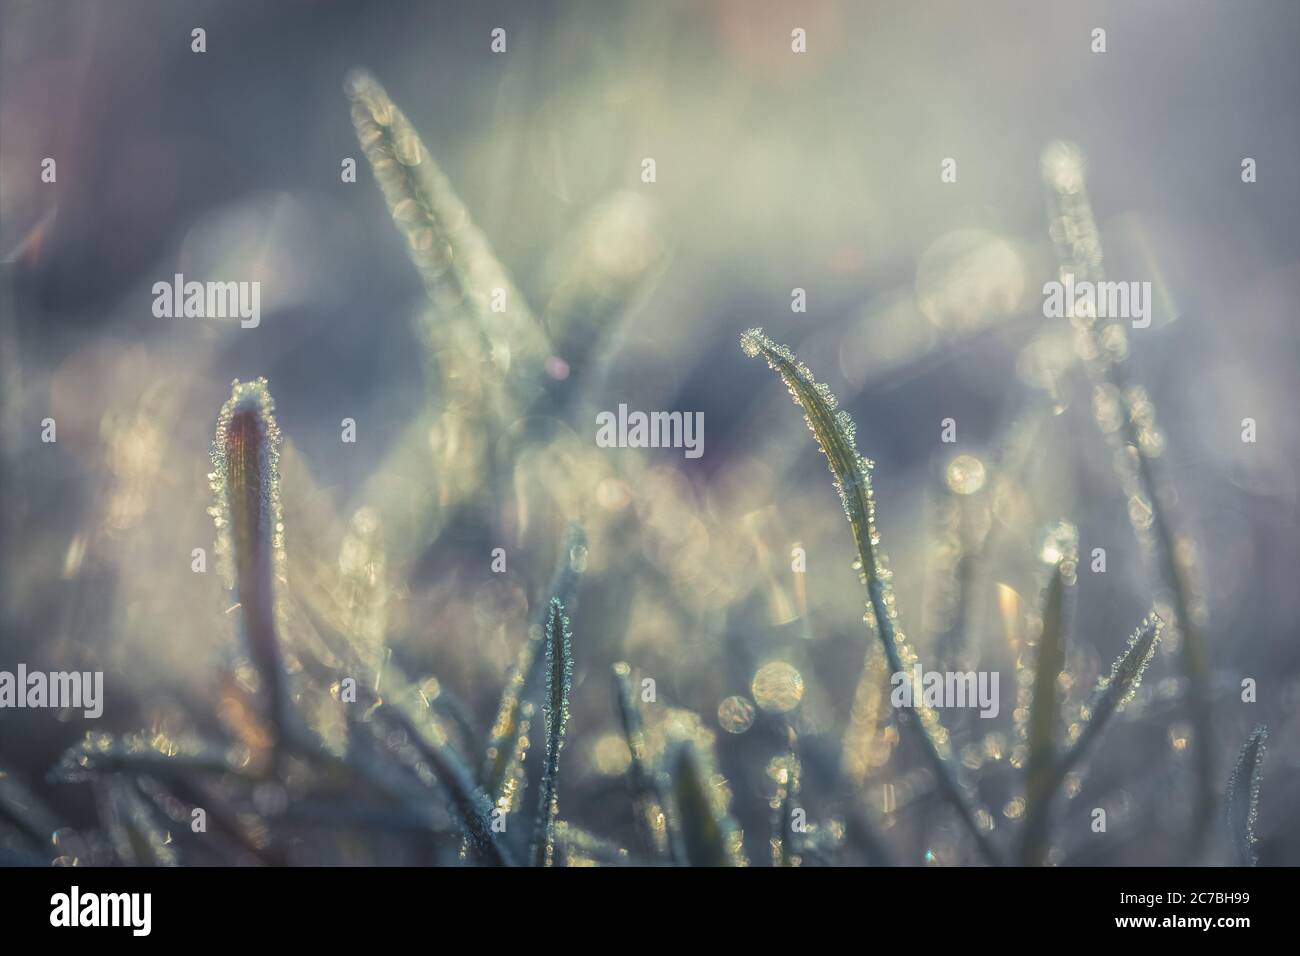 Early Morning Dew On Frozen Grass In The English Winter Stock Photo Alamy